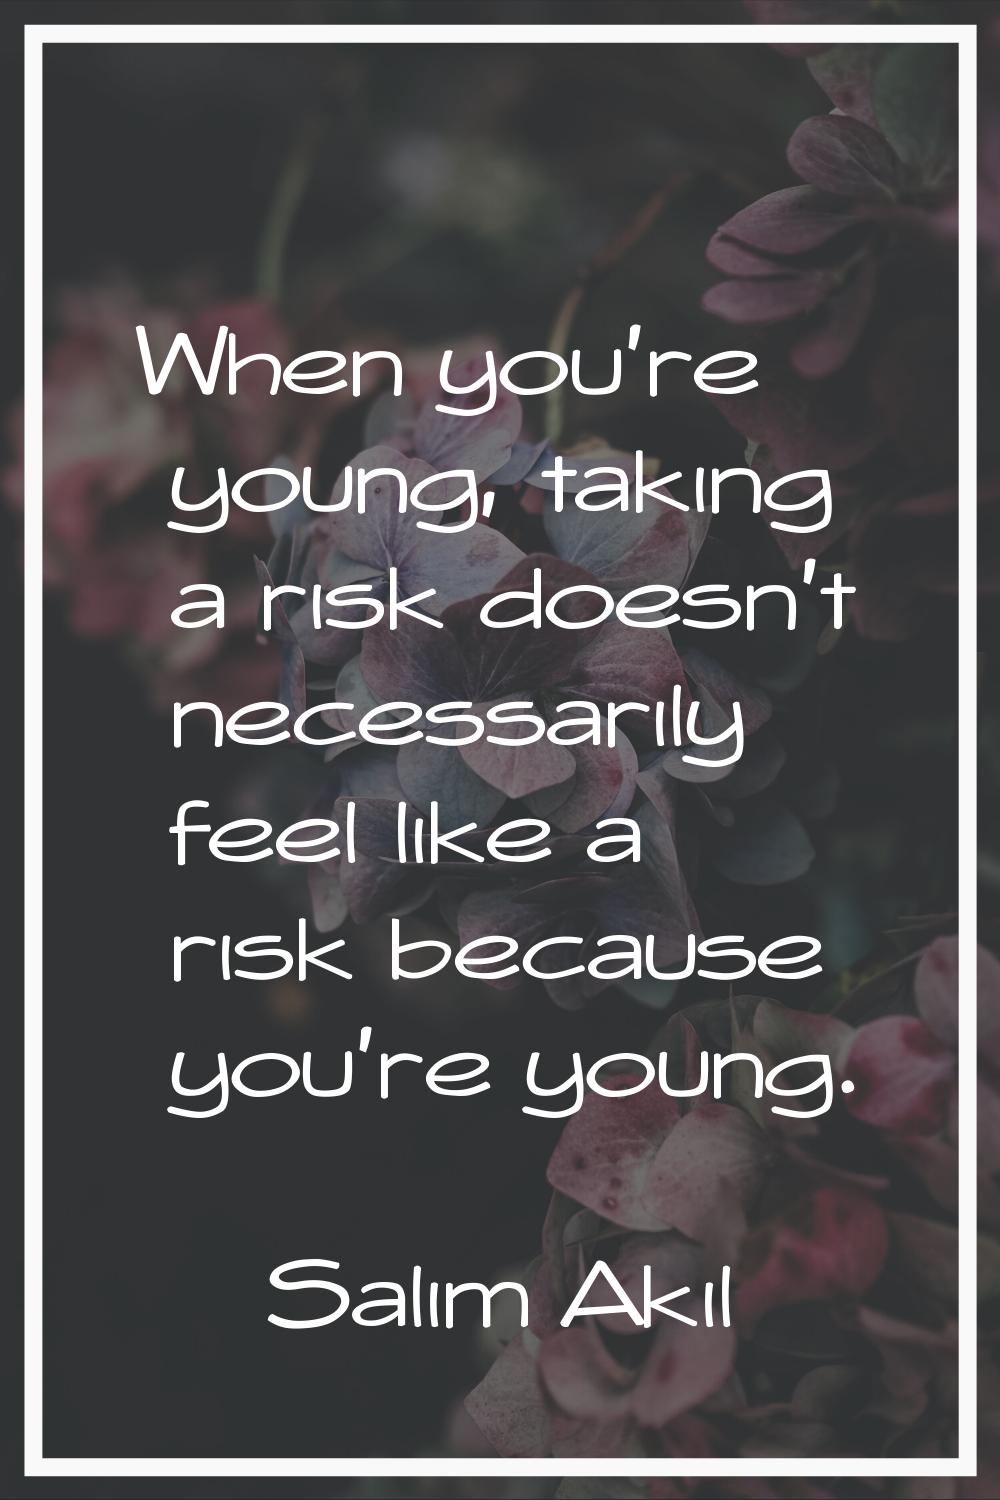 When you're young, taking a risk doesn't necessarily feel like a risk because you're young.